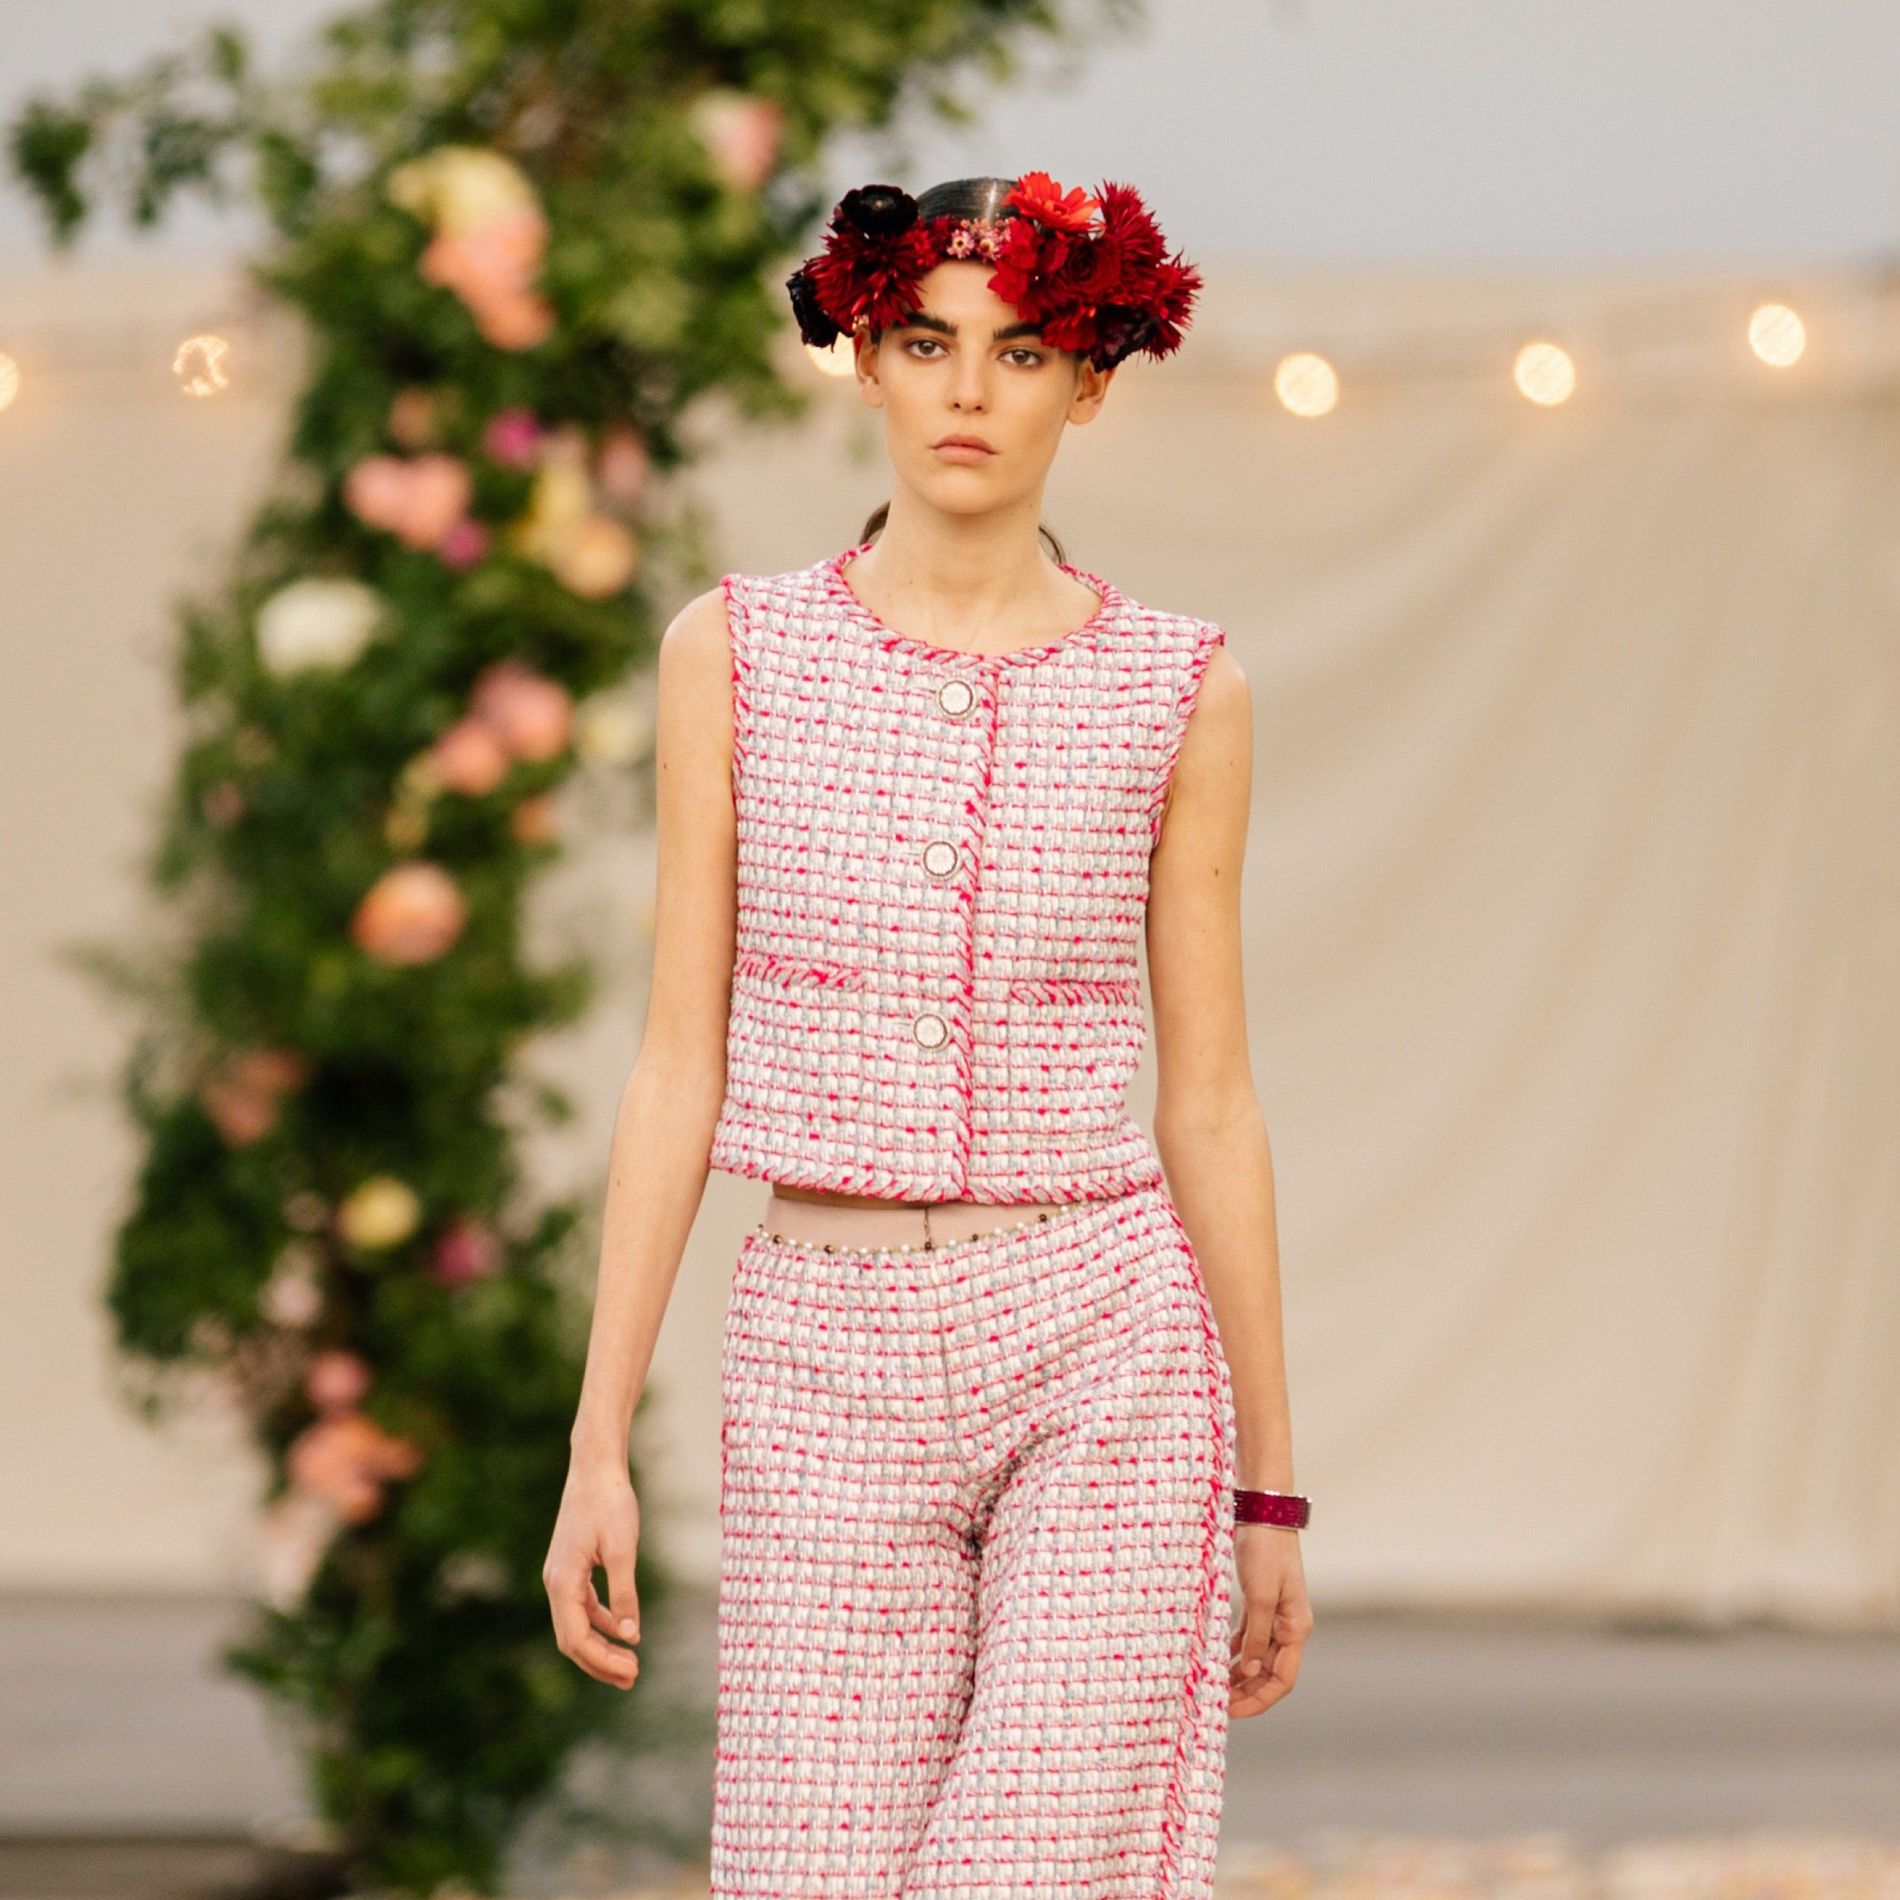 Pink Chanel Couture Spring 21 look with asymmetrical flower crown